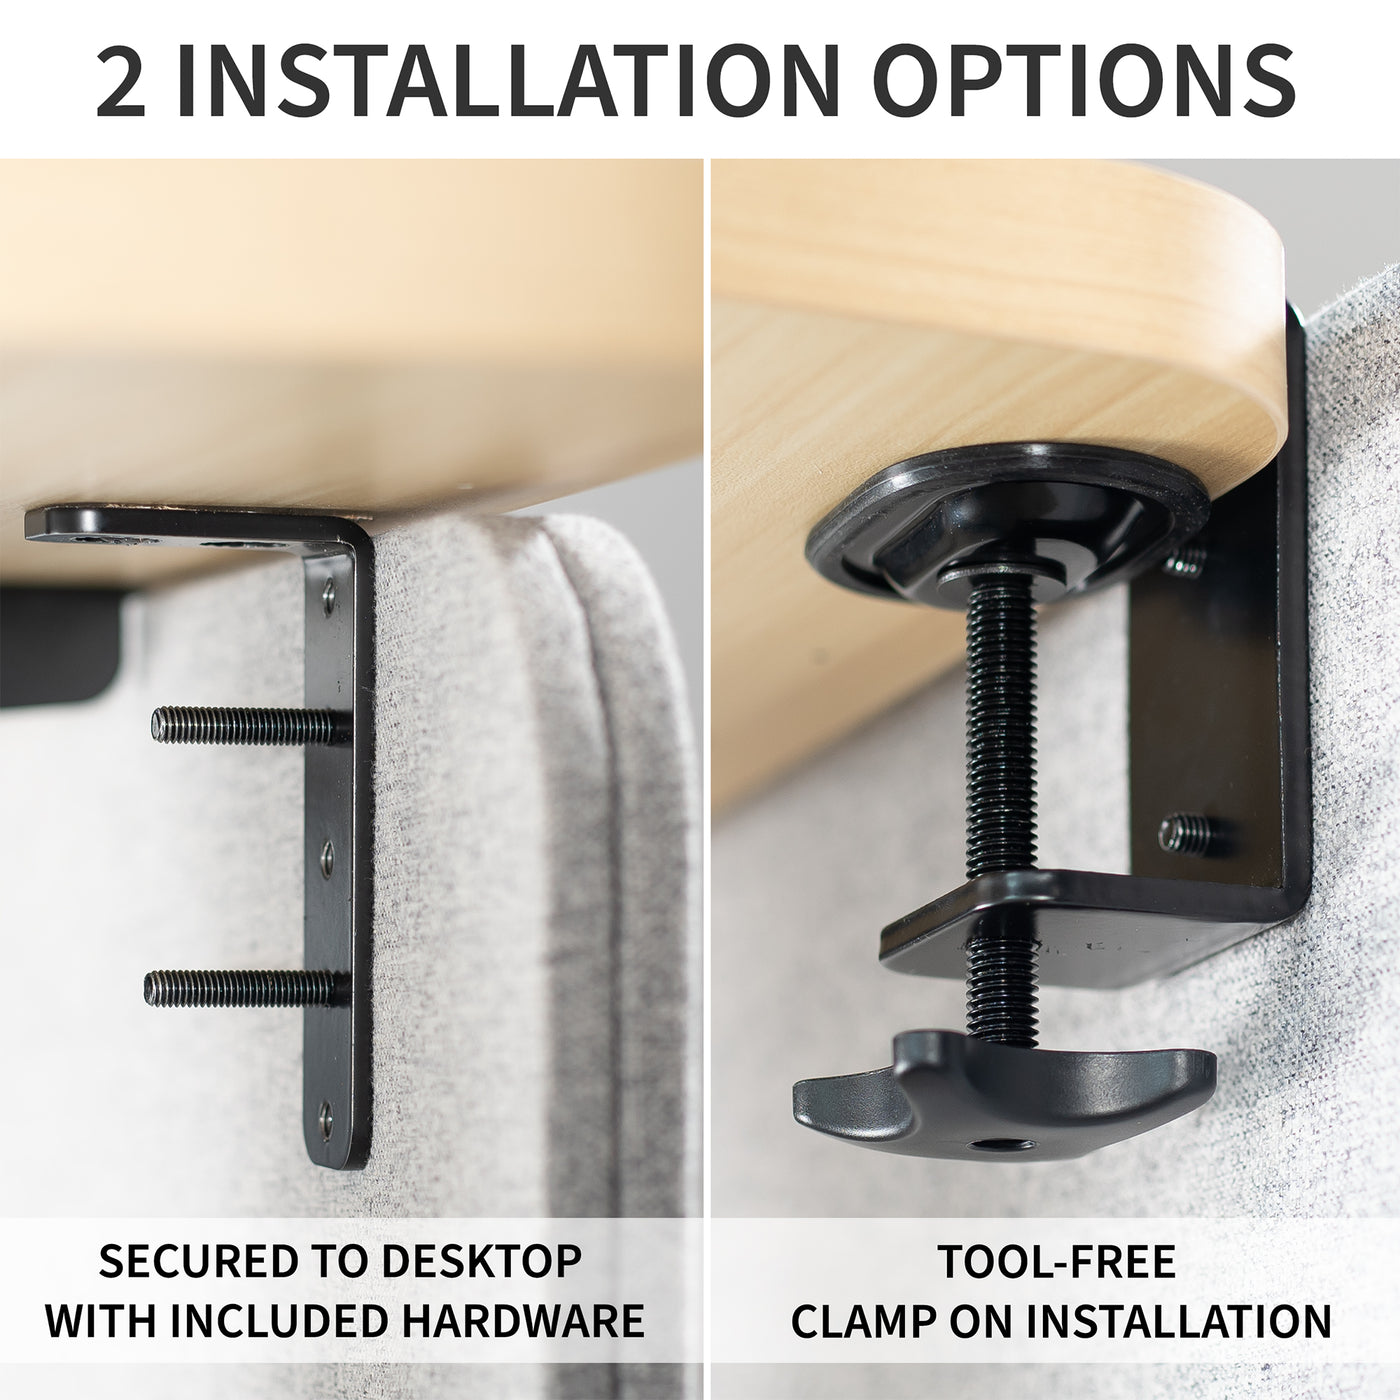 Clamp-on/Screw-on Desk Privacy Panel